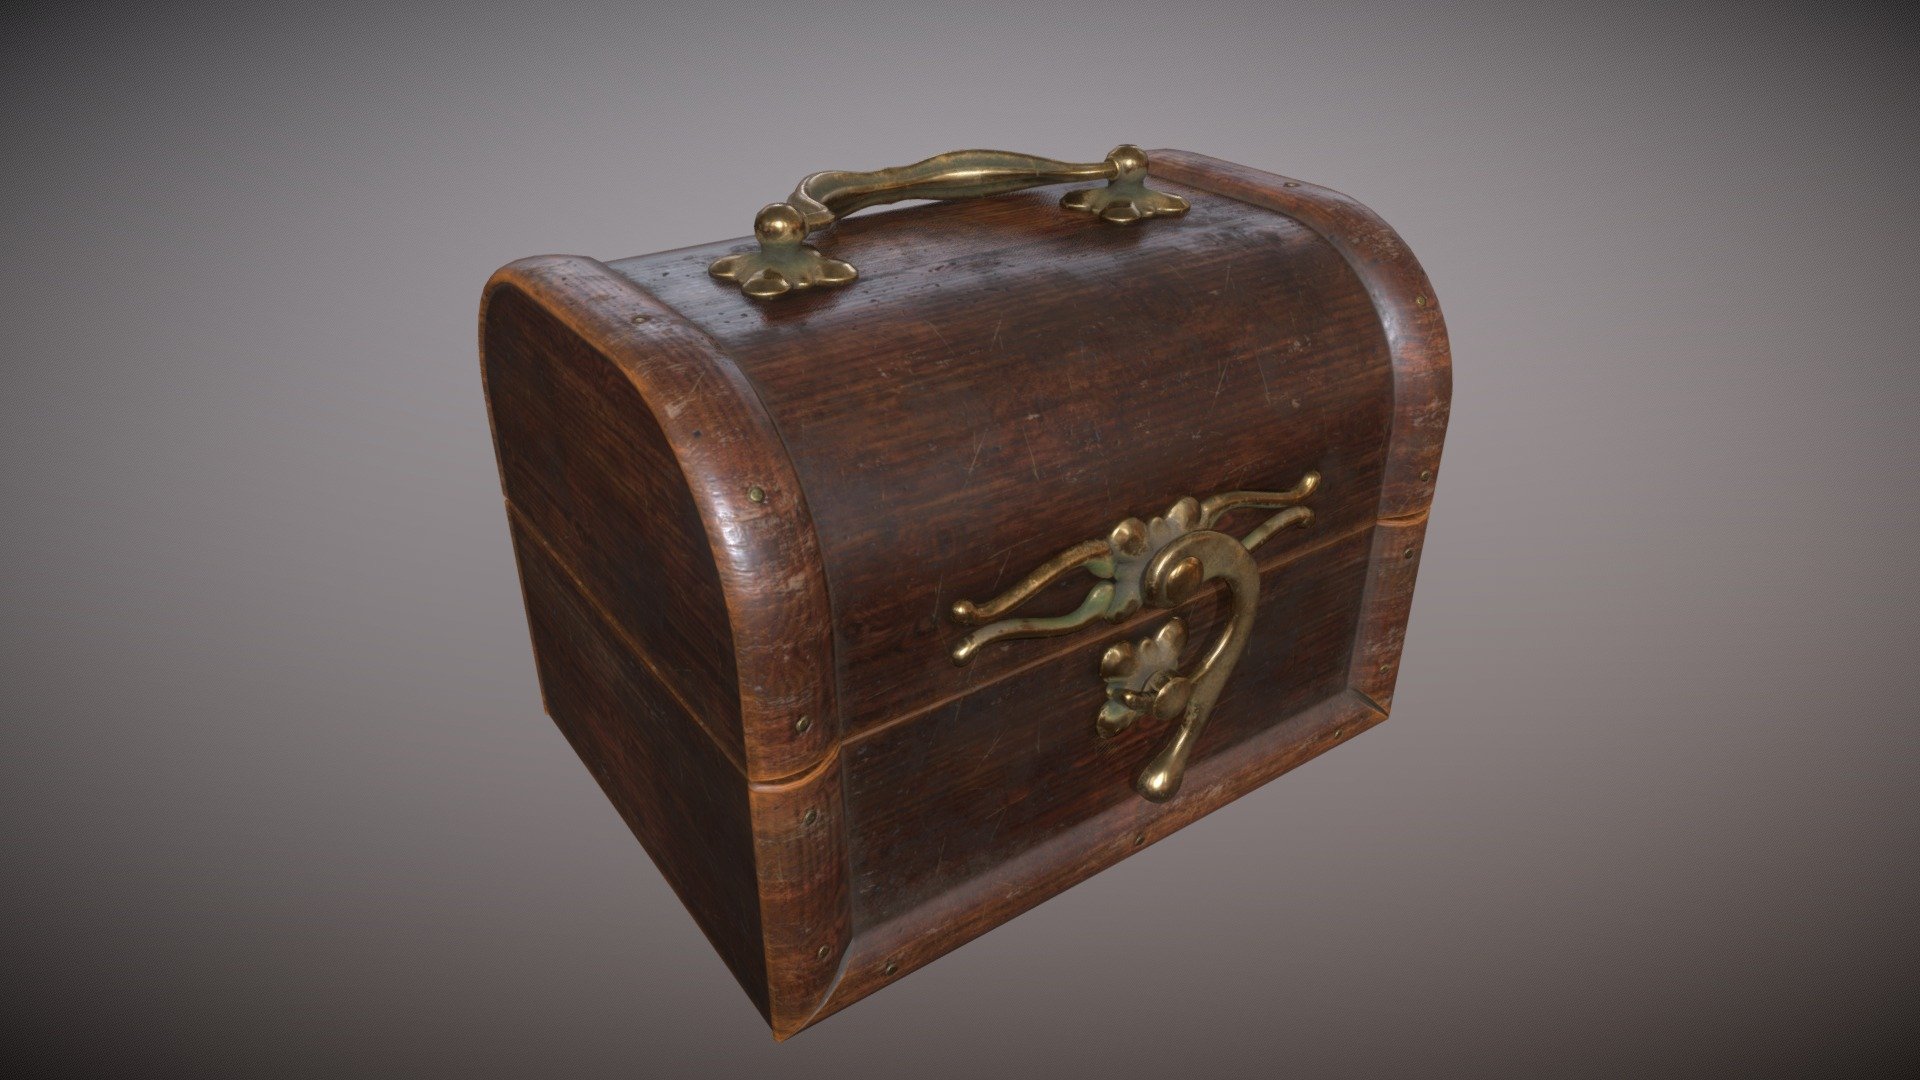 Old Jewelry wooden box

Low poly game ready model. Total polycount 9172 tris.

PBR Metallic - Roughness 2k textures 3d model